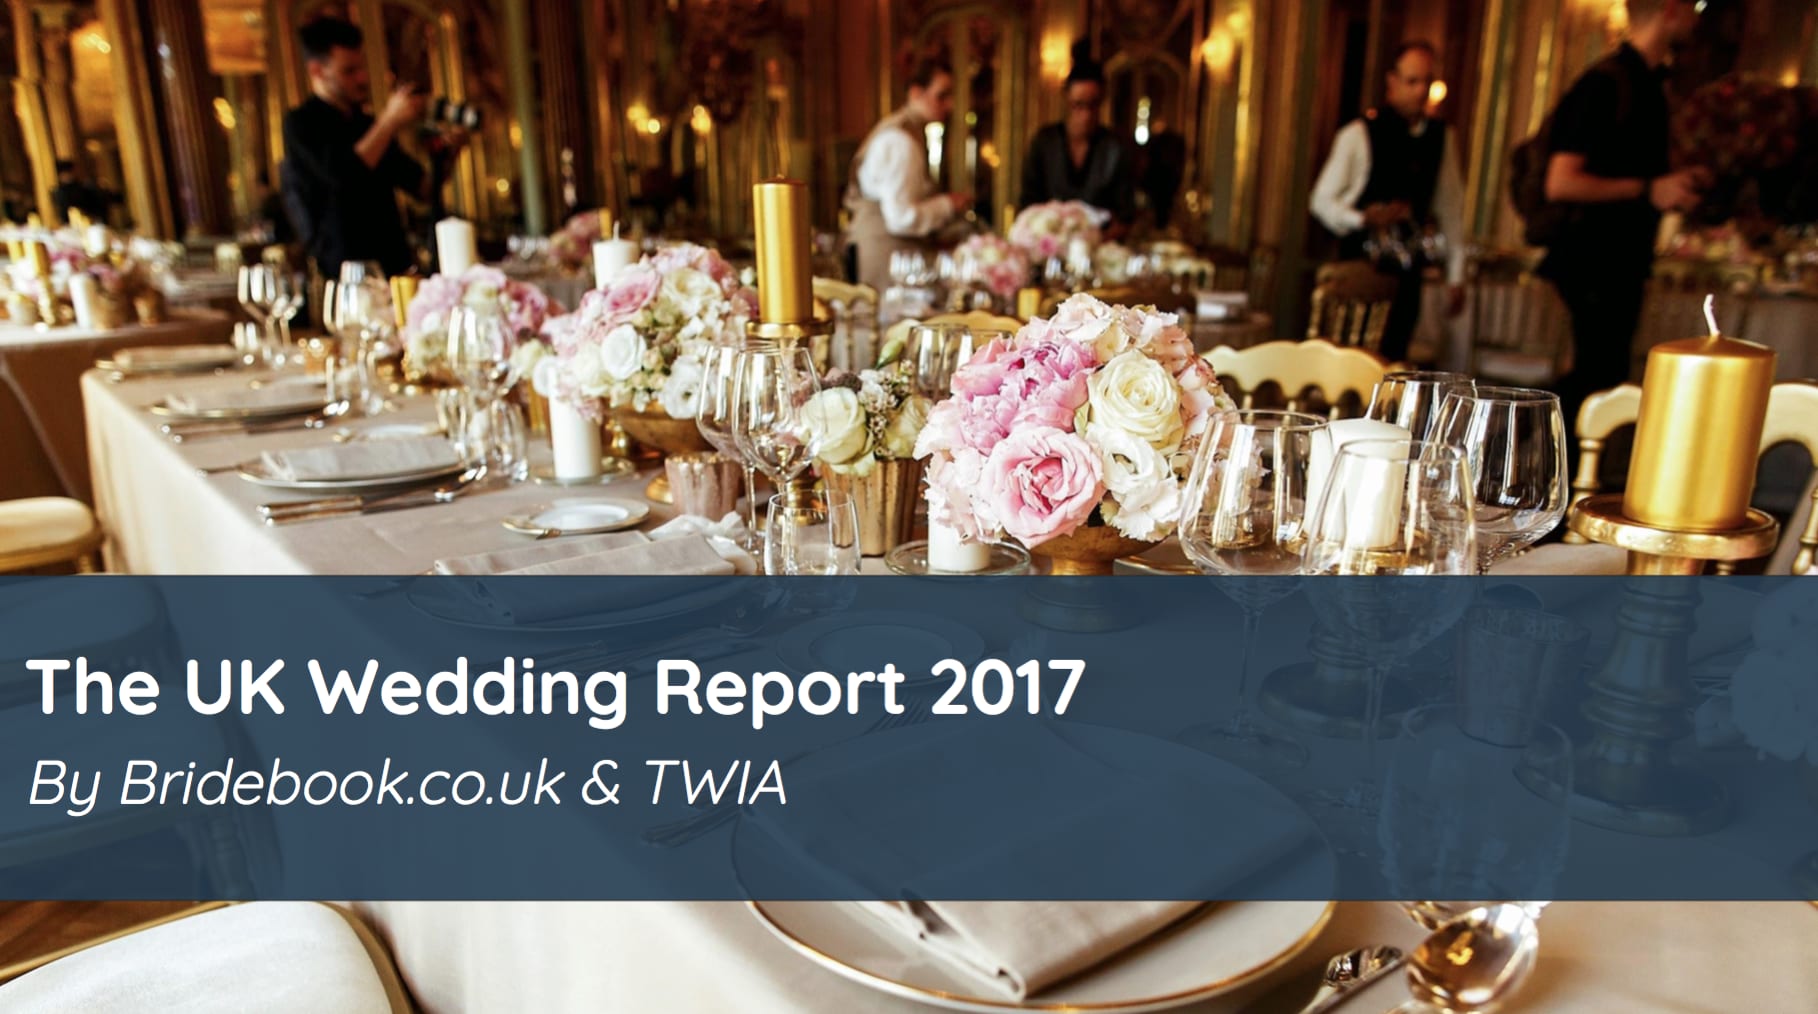 The UK Wedding Report 2017 by Bridebook.co.uk and TWIA